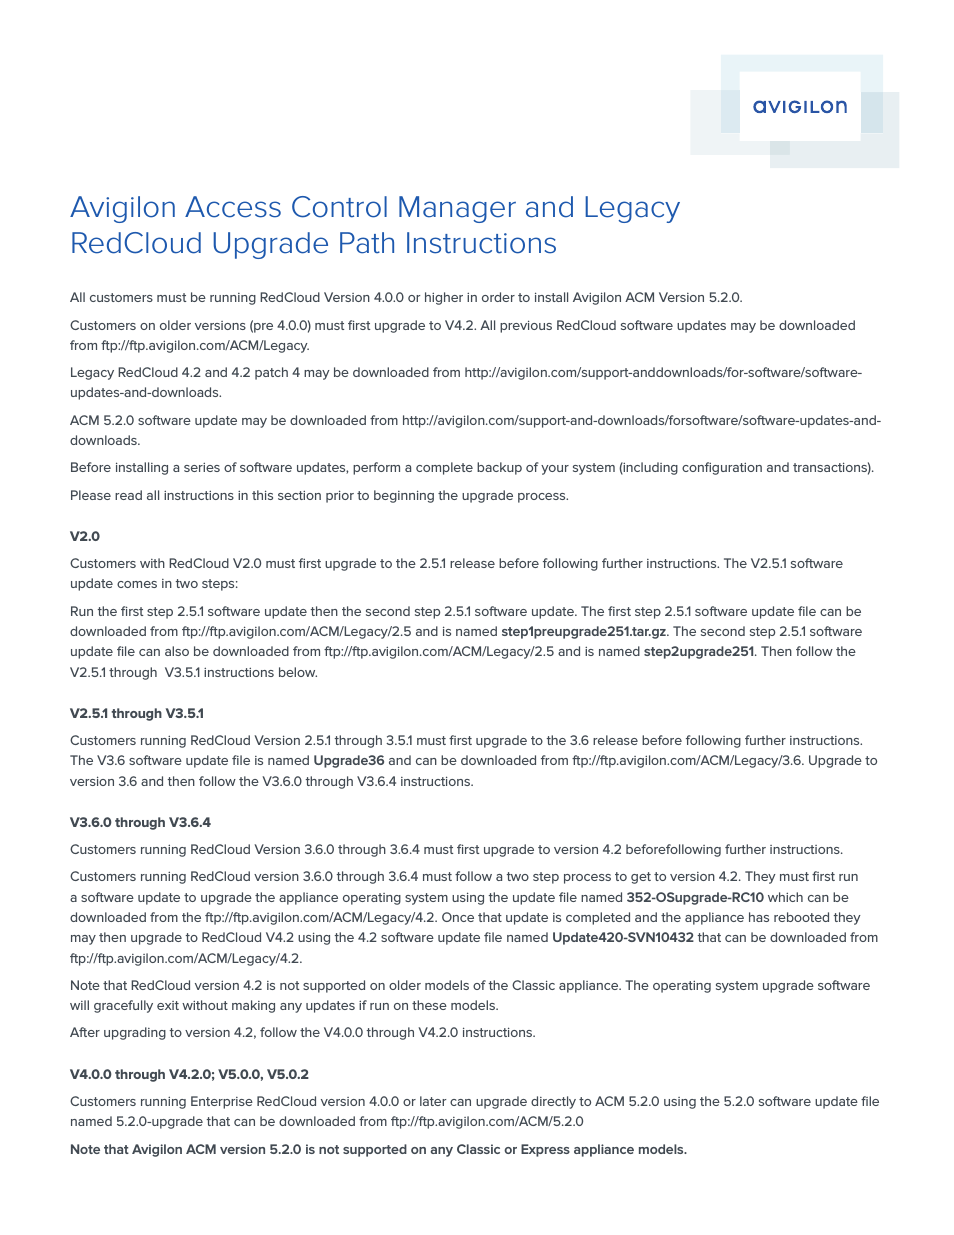 Access Control Manager - Legacy RedCloud Upgrade Path Instructions